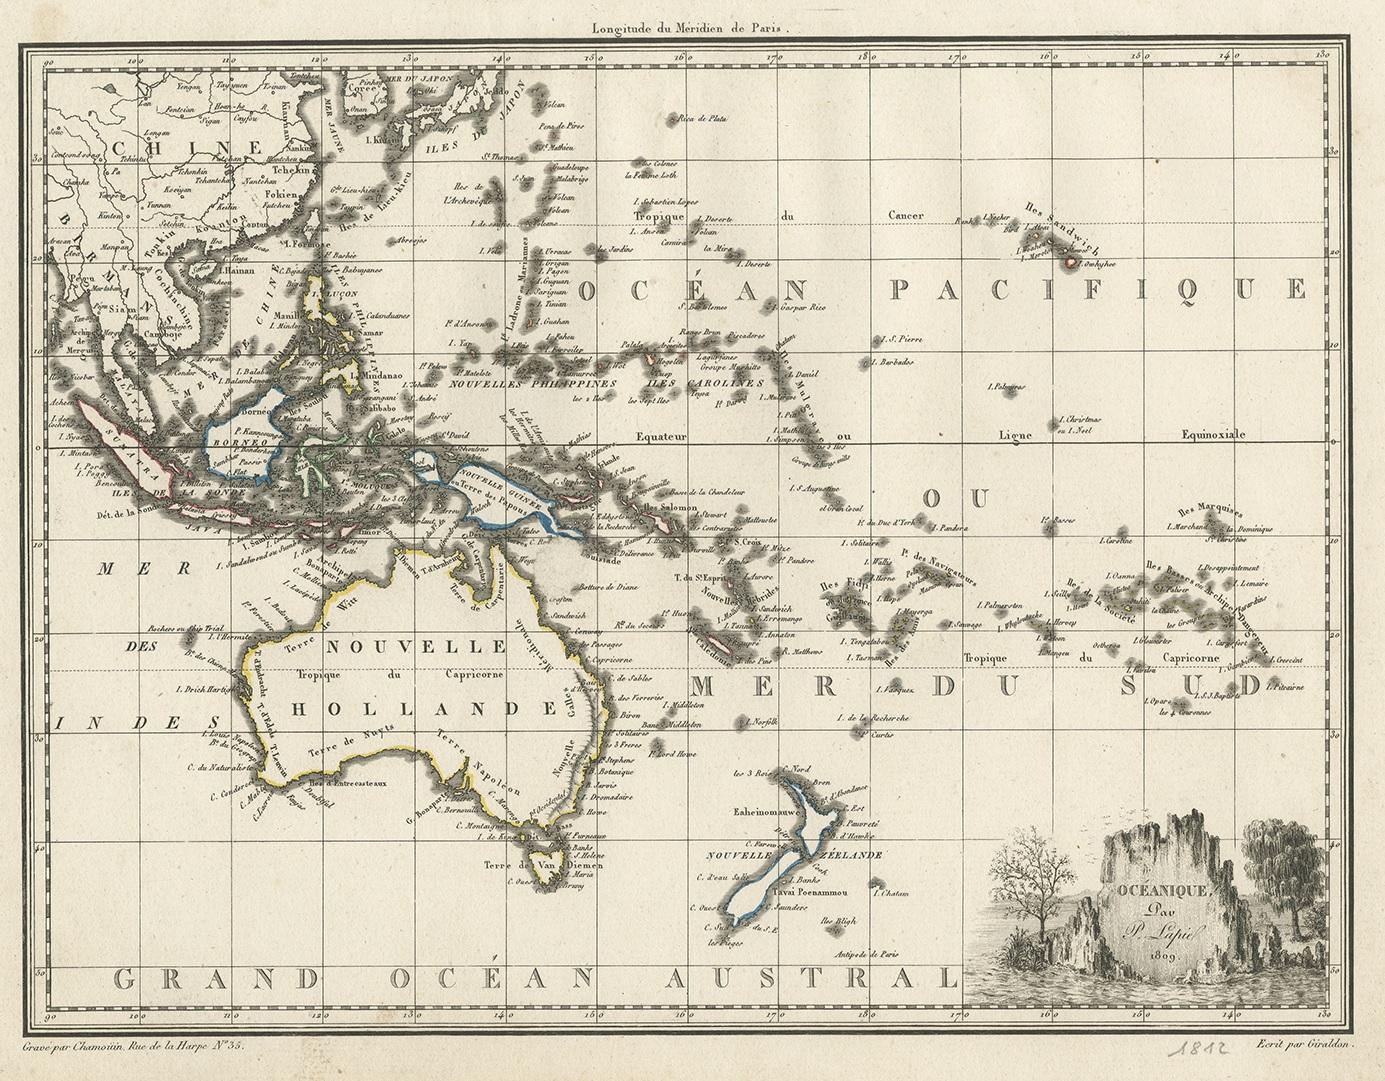 Antique map titled 'Océanique'. Decorative and rare map of western Pacific and Australia using the Fench names given by the Boudain expedition, eg. ‘Terre de Napoleon’, before the revision from Matthew Flinders prior exploration of the same coast.